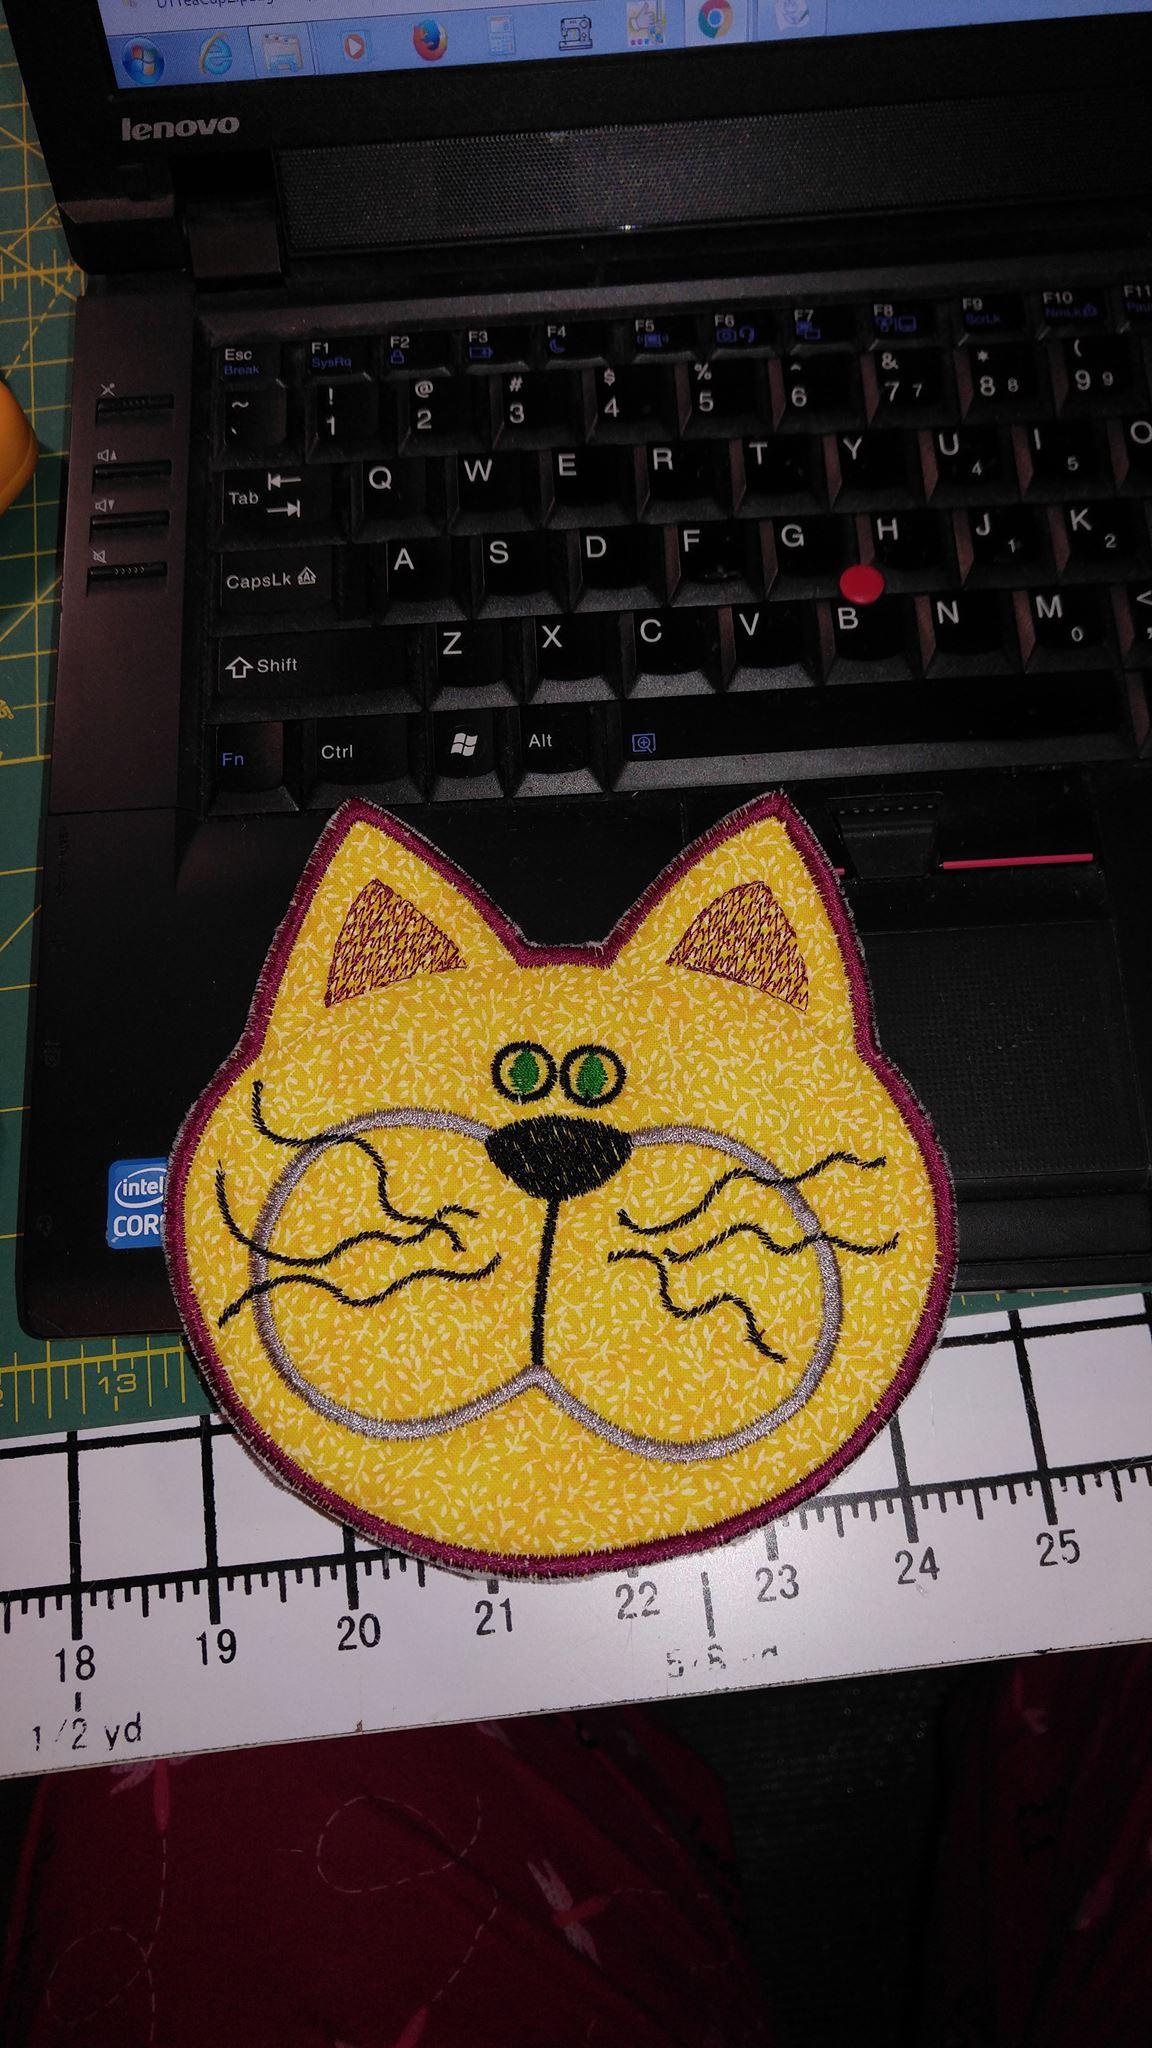 Placement with Cat free applique embroidery design